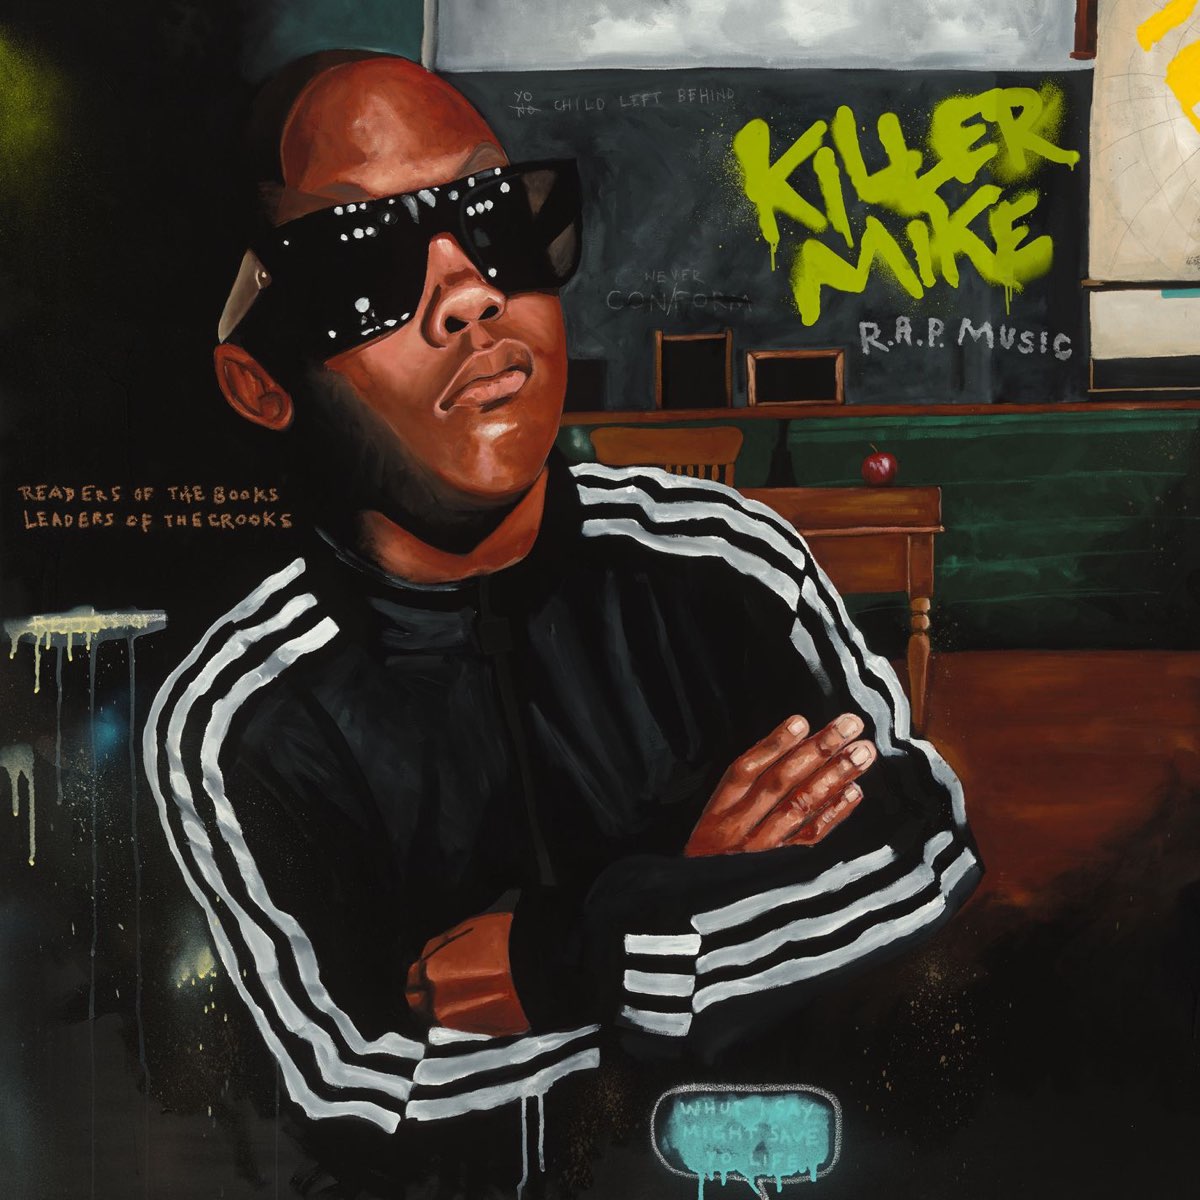 R.A.P. Music by Killer Mike on Apple Music